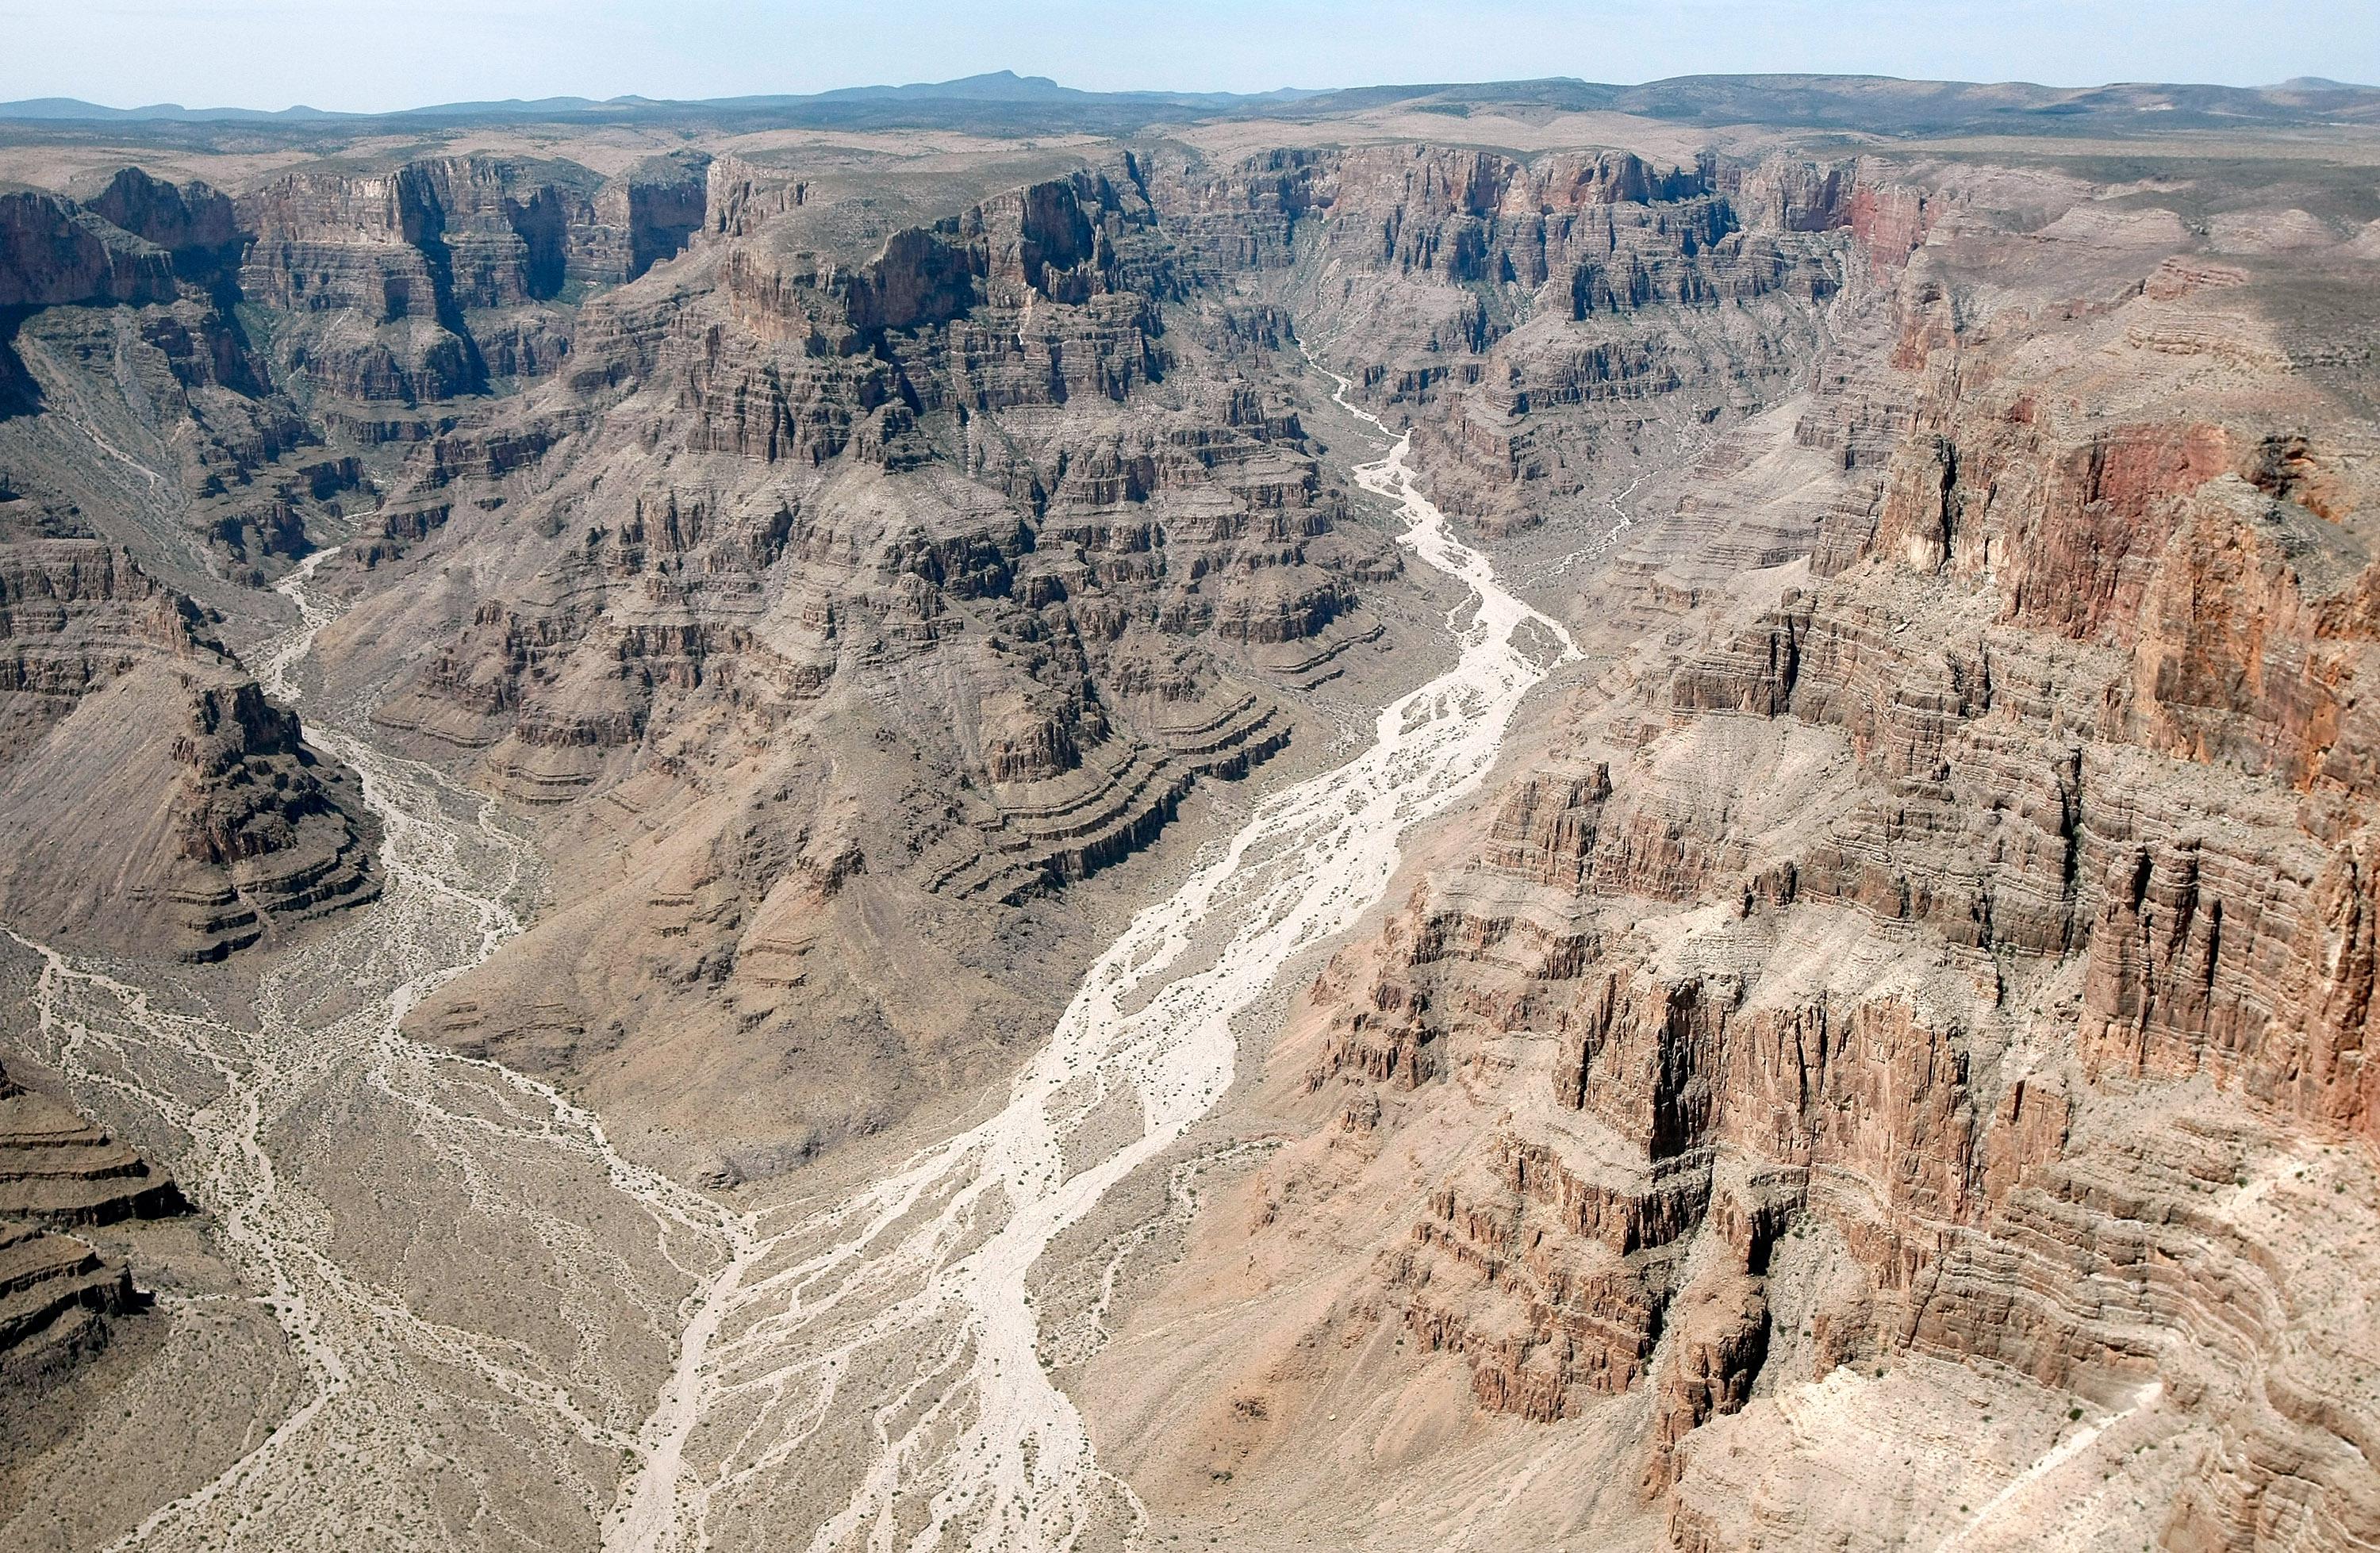 An aerial view of the Grand Canyon.